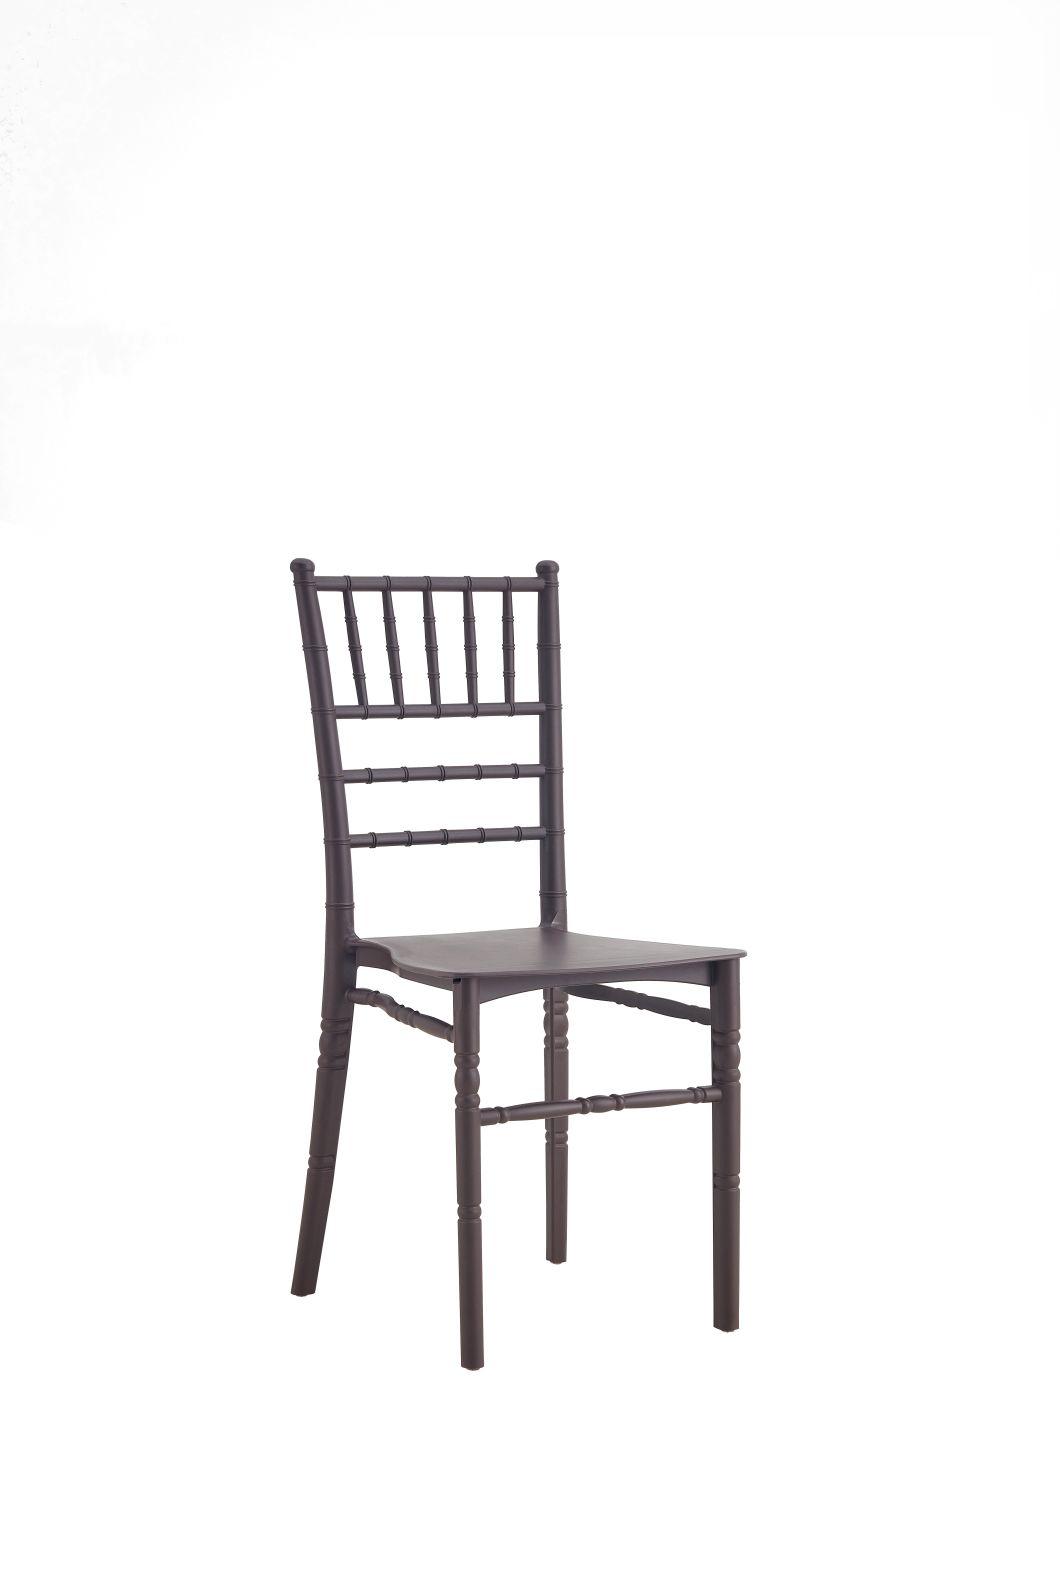 Wholesale Dhf Modern Plastic Chair Dining, Cafe Furniture Chair for Outdoor